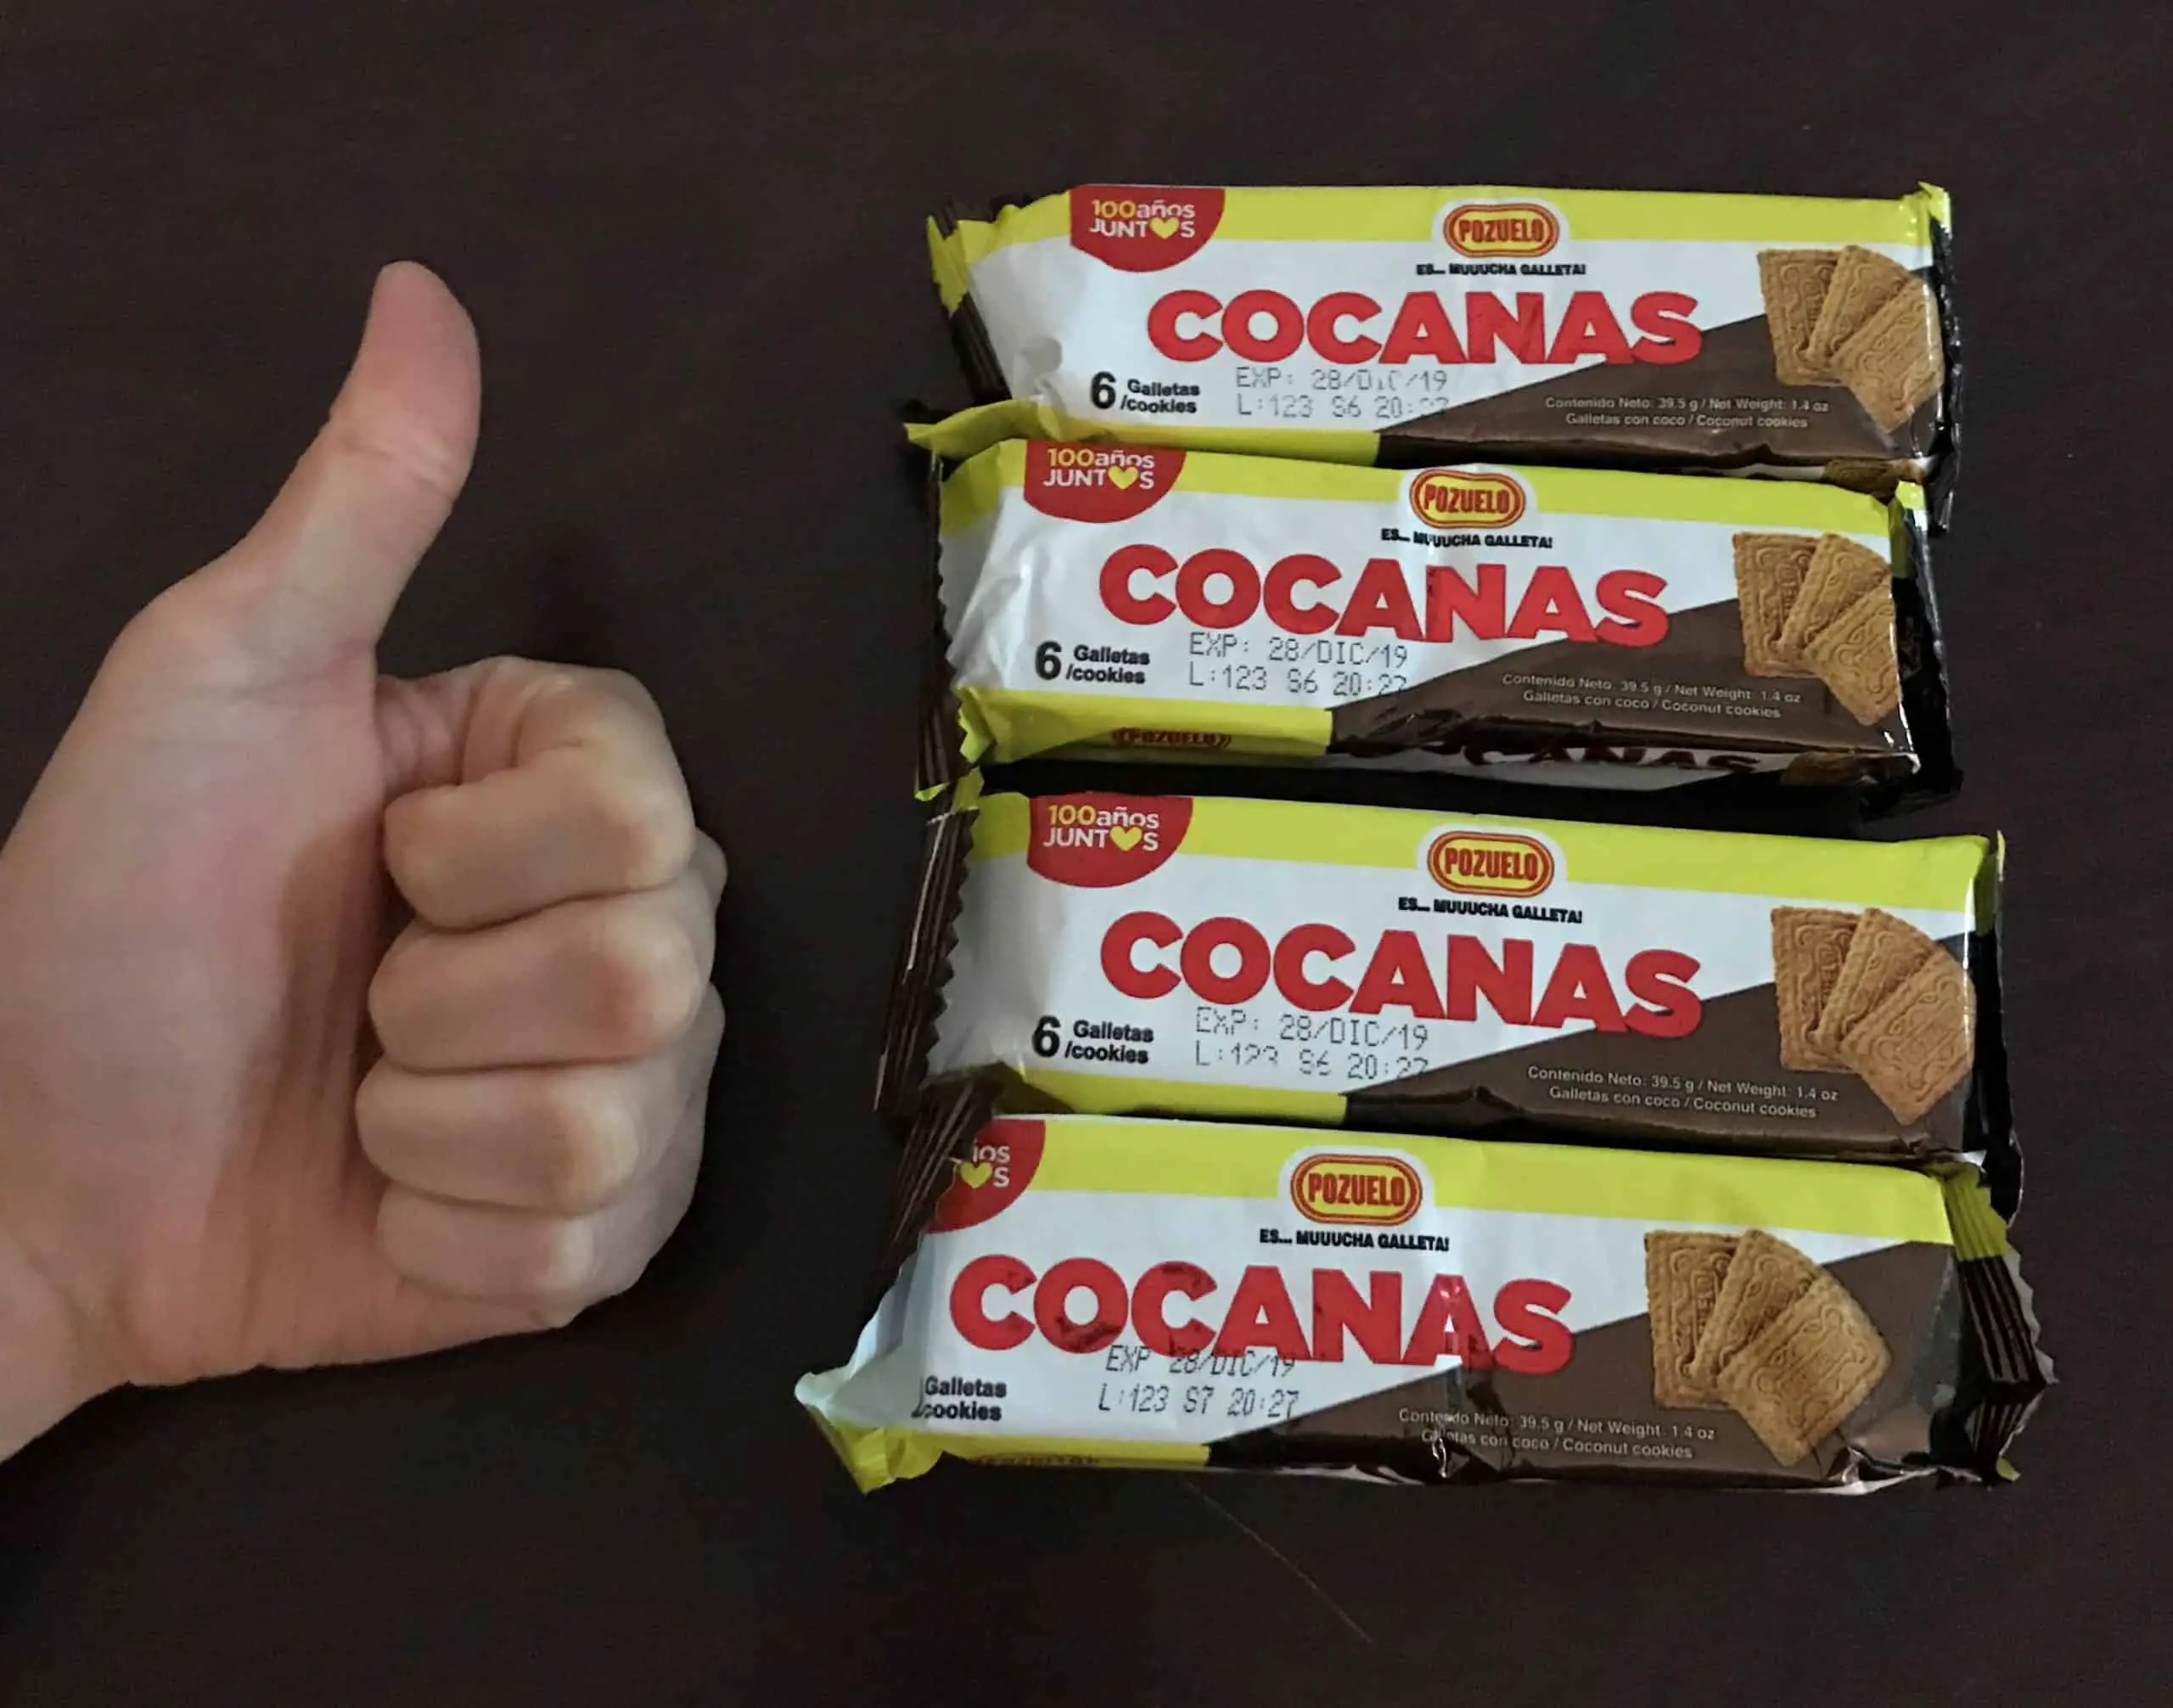 On a wood table are four Costa Rican Coconas coconut cracker snacks in their unopened wrappers. Meggie's hand, in a thumbs up, is next to the crackers.